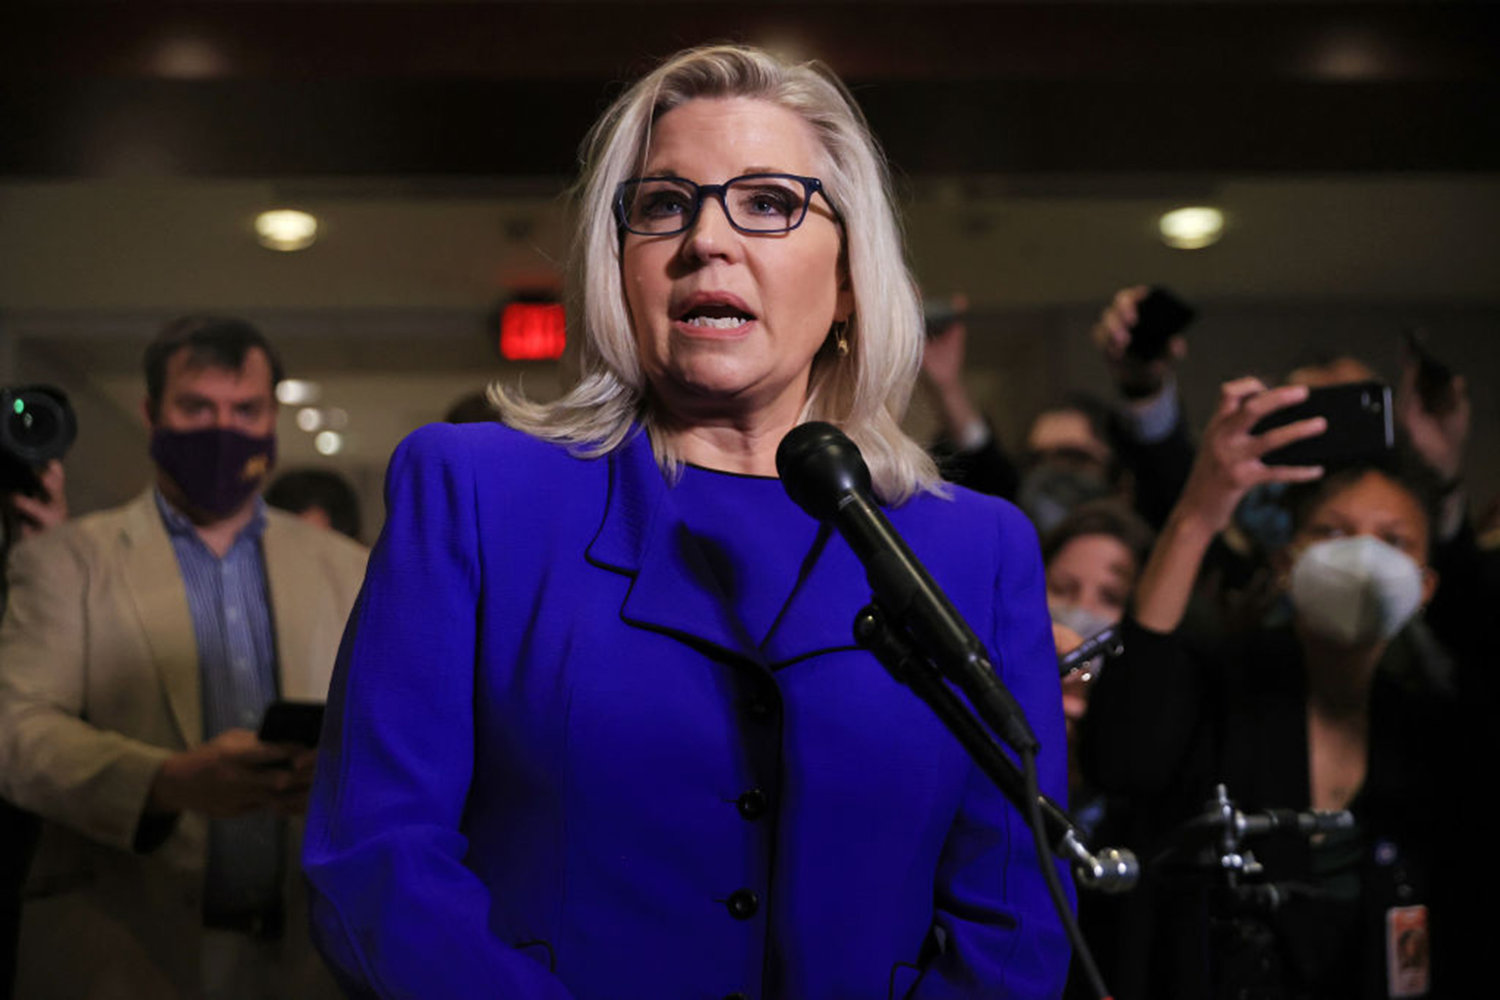 Rep. Liz Cheney, R-Wyo., talks to reporters after House Republicans voted to remove her as conference chair in the U.S. Capitol Visitors Center on May 12, 2021, in Washington, D.C. (Chip Somodevilla/Getty Images/TNS)